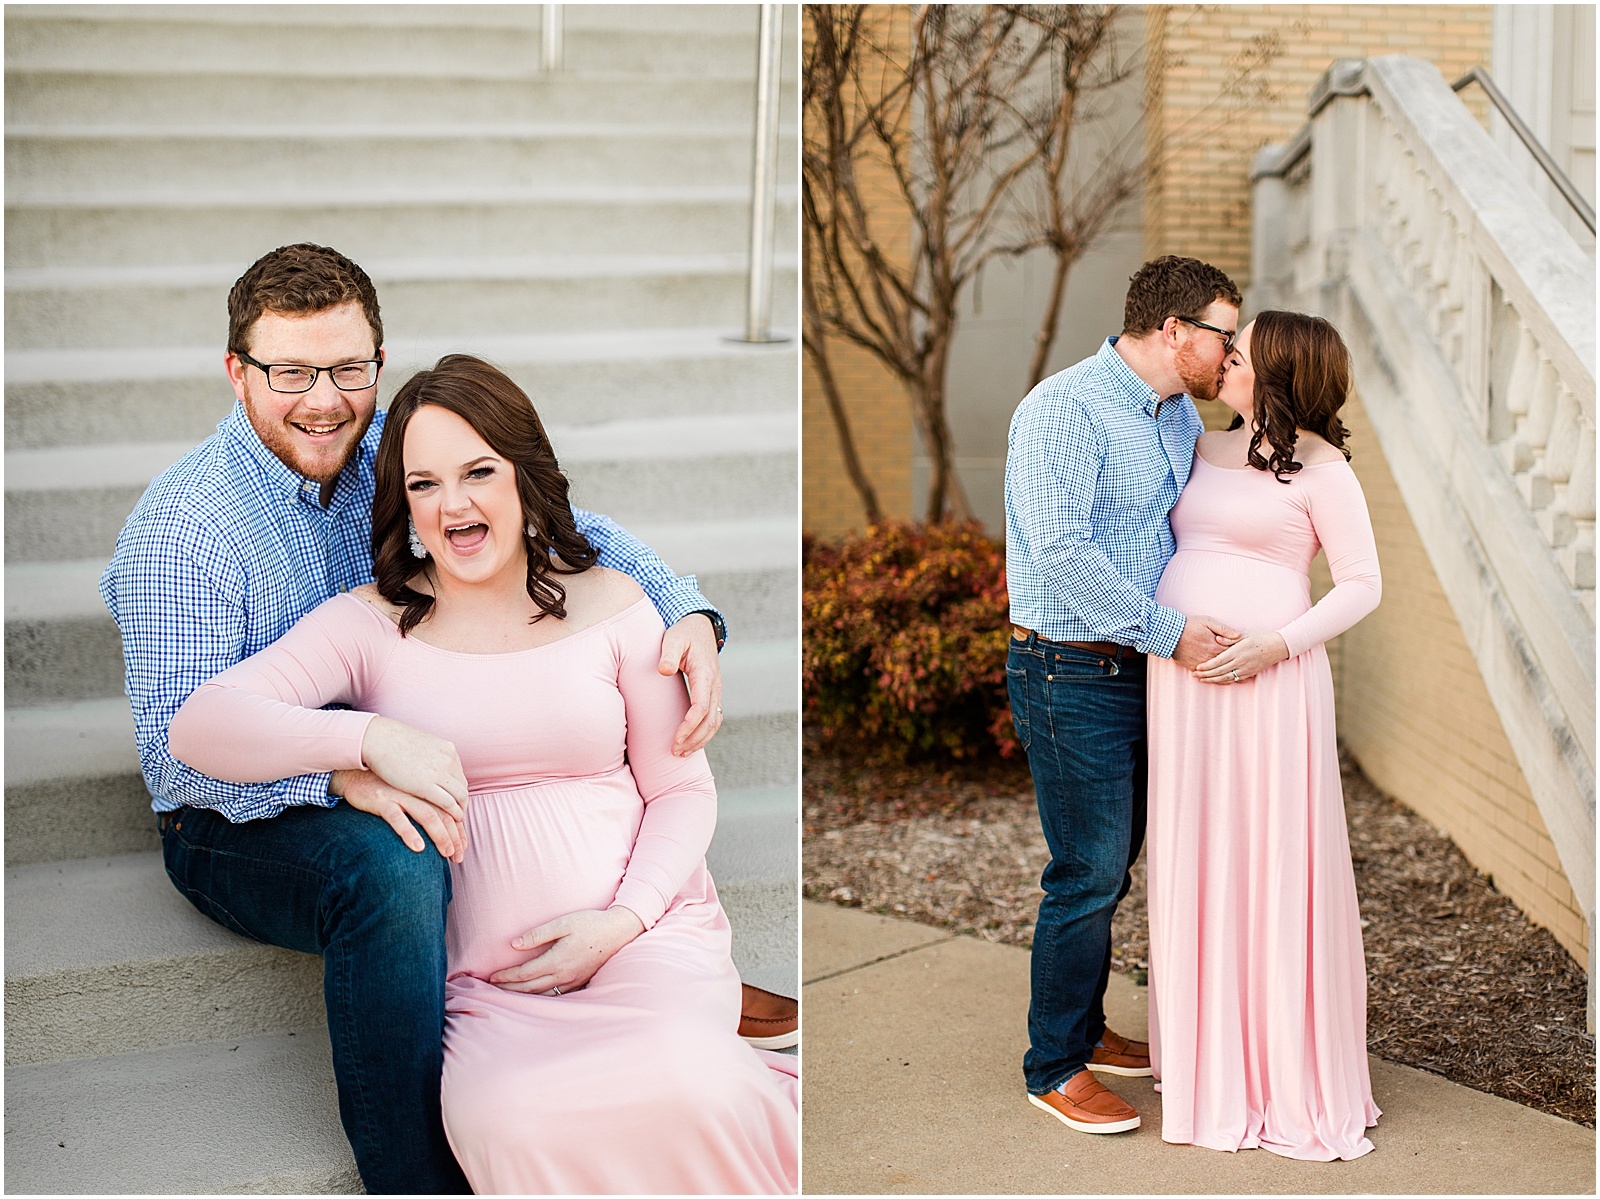 A Downtown Owensboro Maternity Session | Kayla and Grant Evansville Indiana Wedding Photographers-0021.jpg